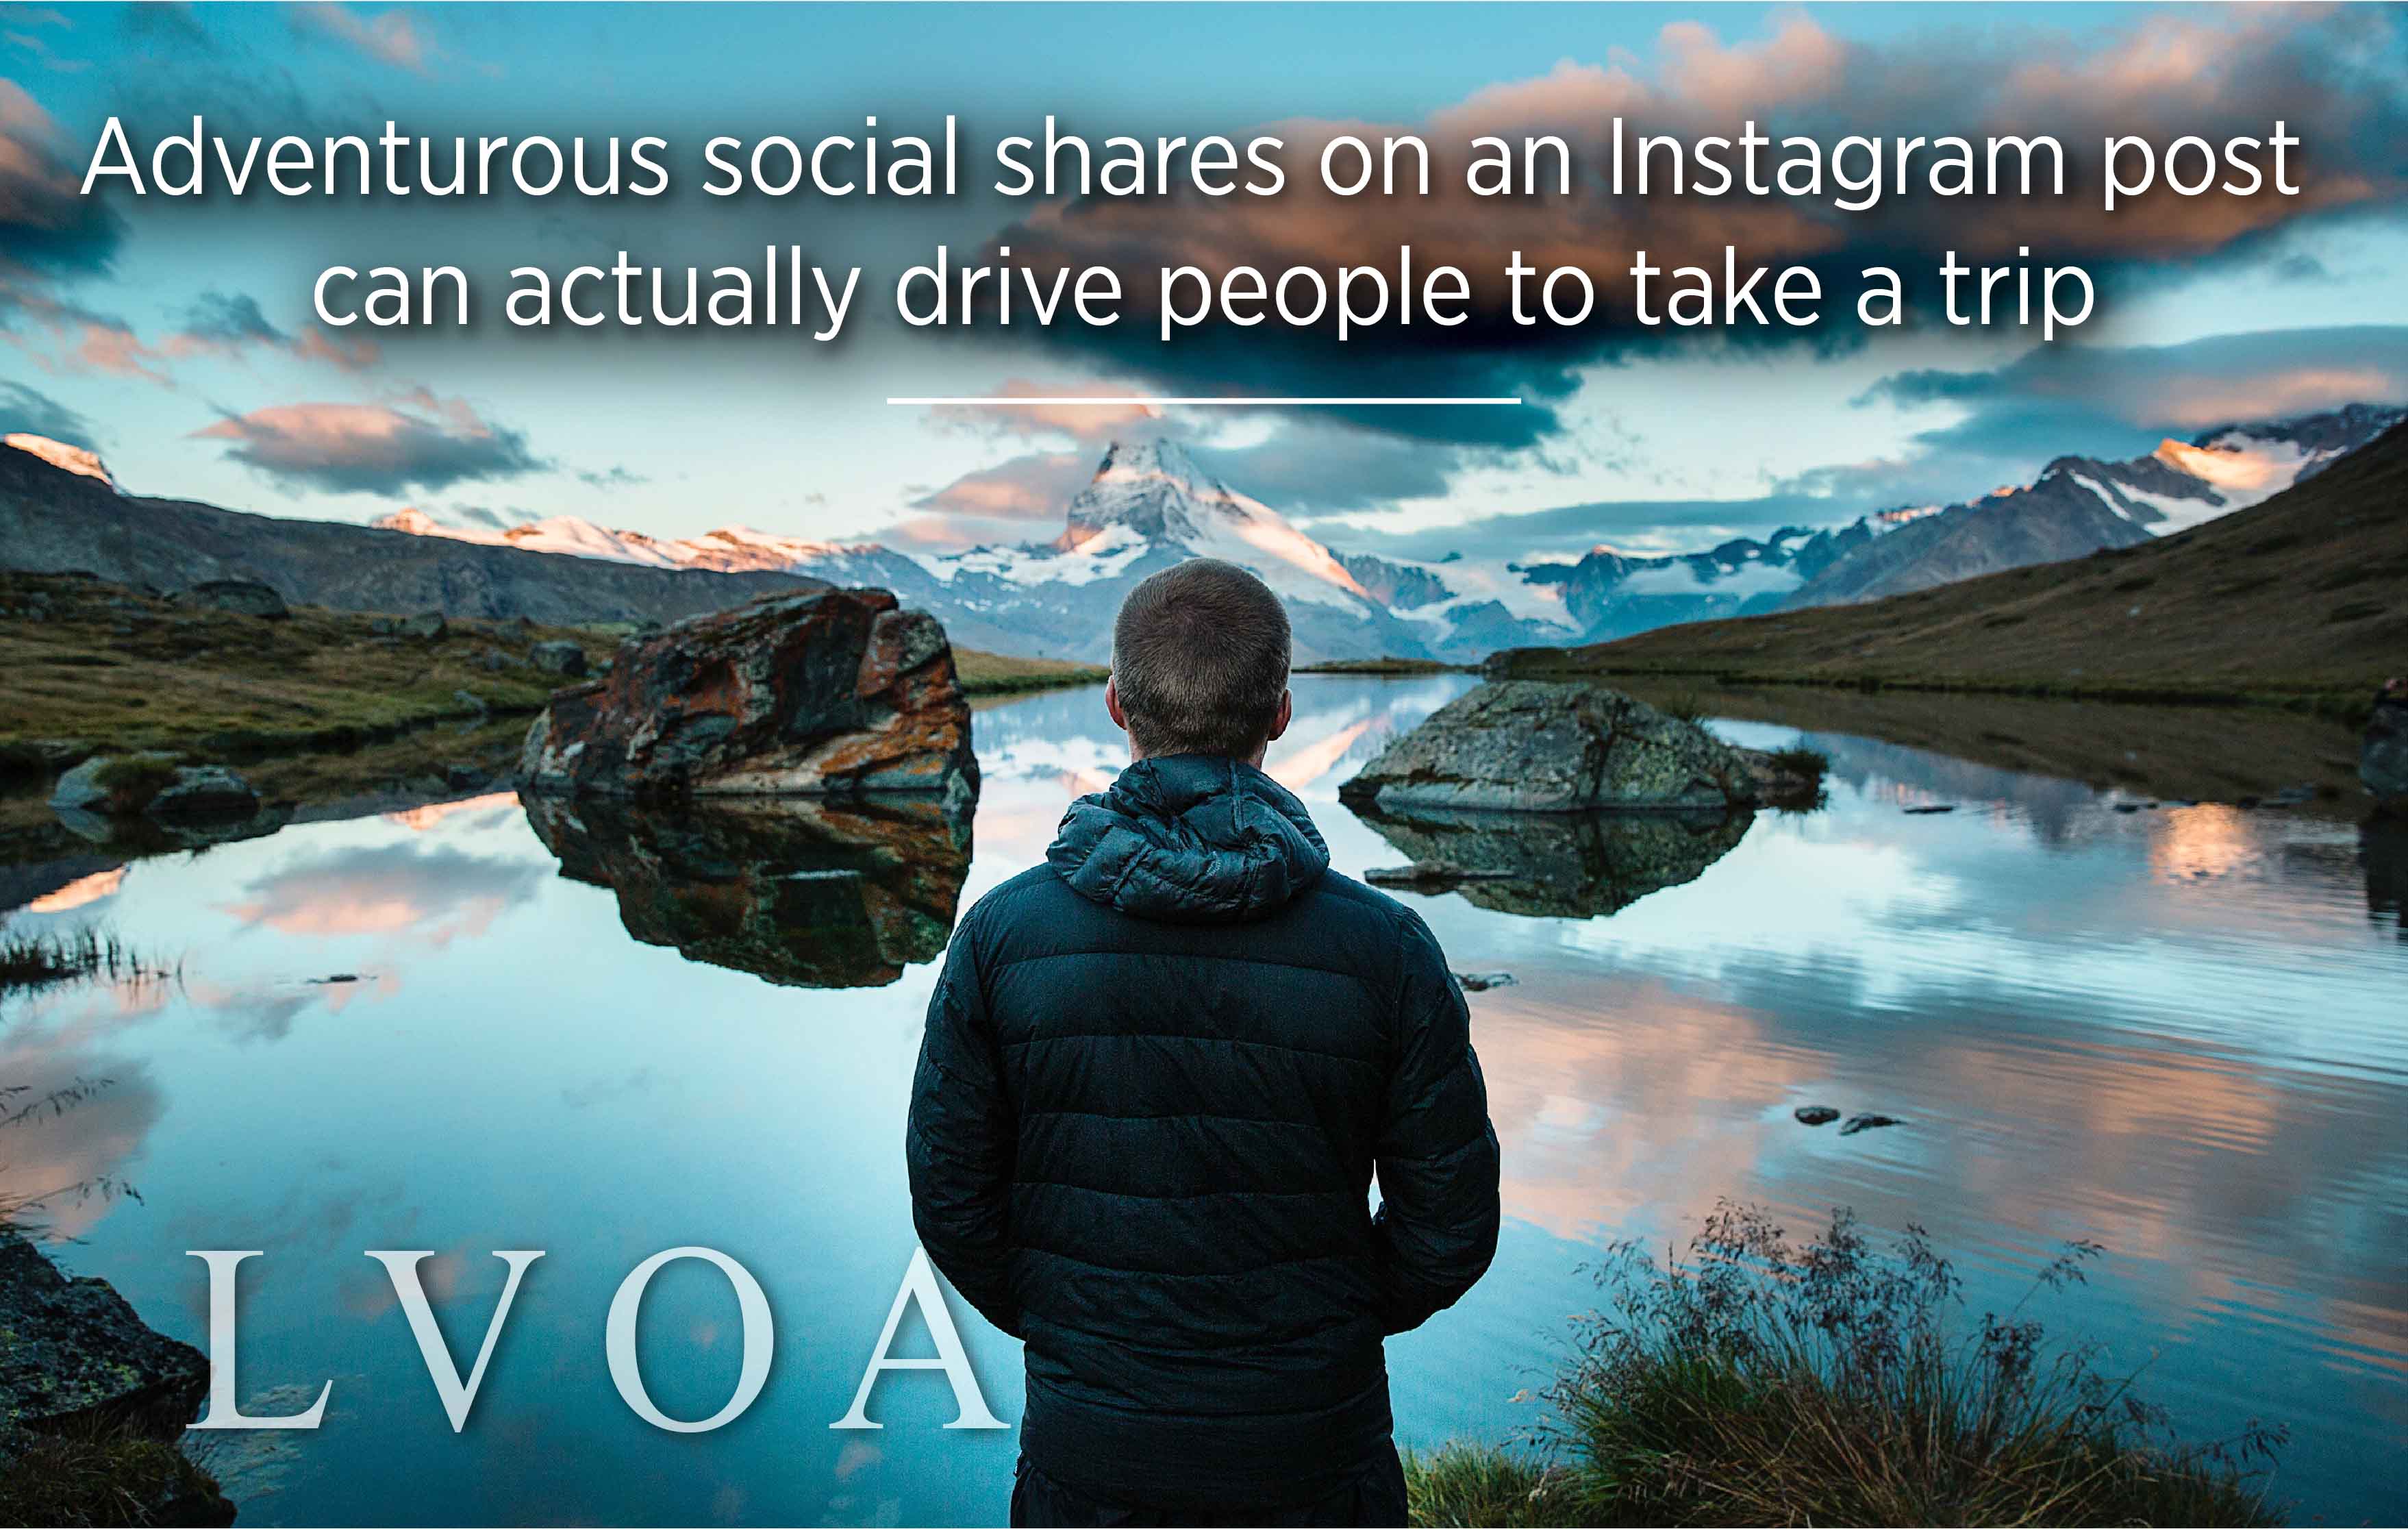 Adventurous-social-shares-on-an-Instagram-post-can-actually-drive-people-to-take-a-trip_LVO_Associates